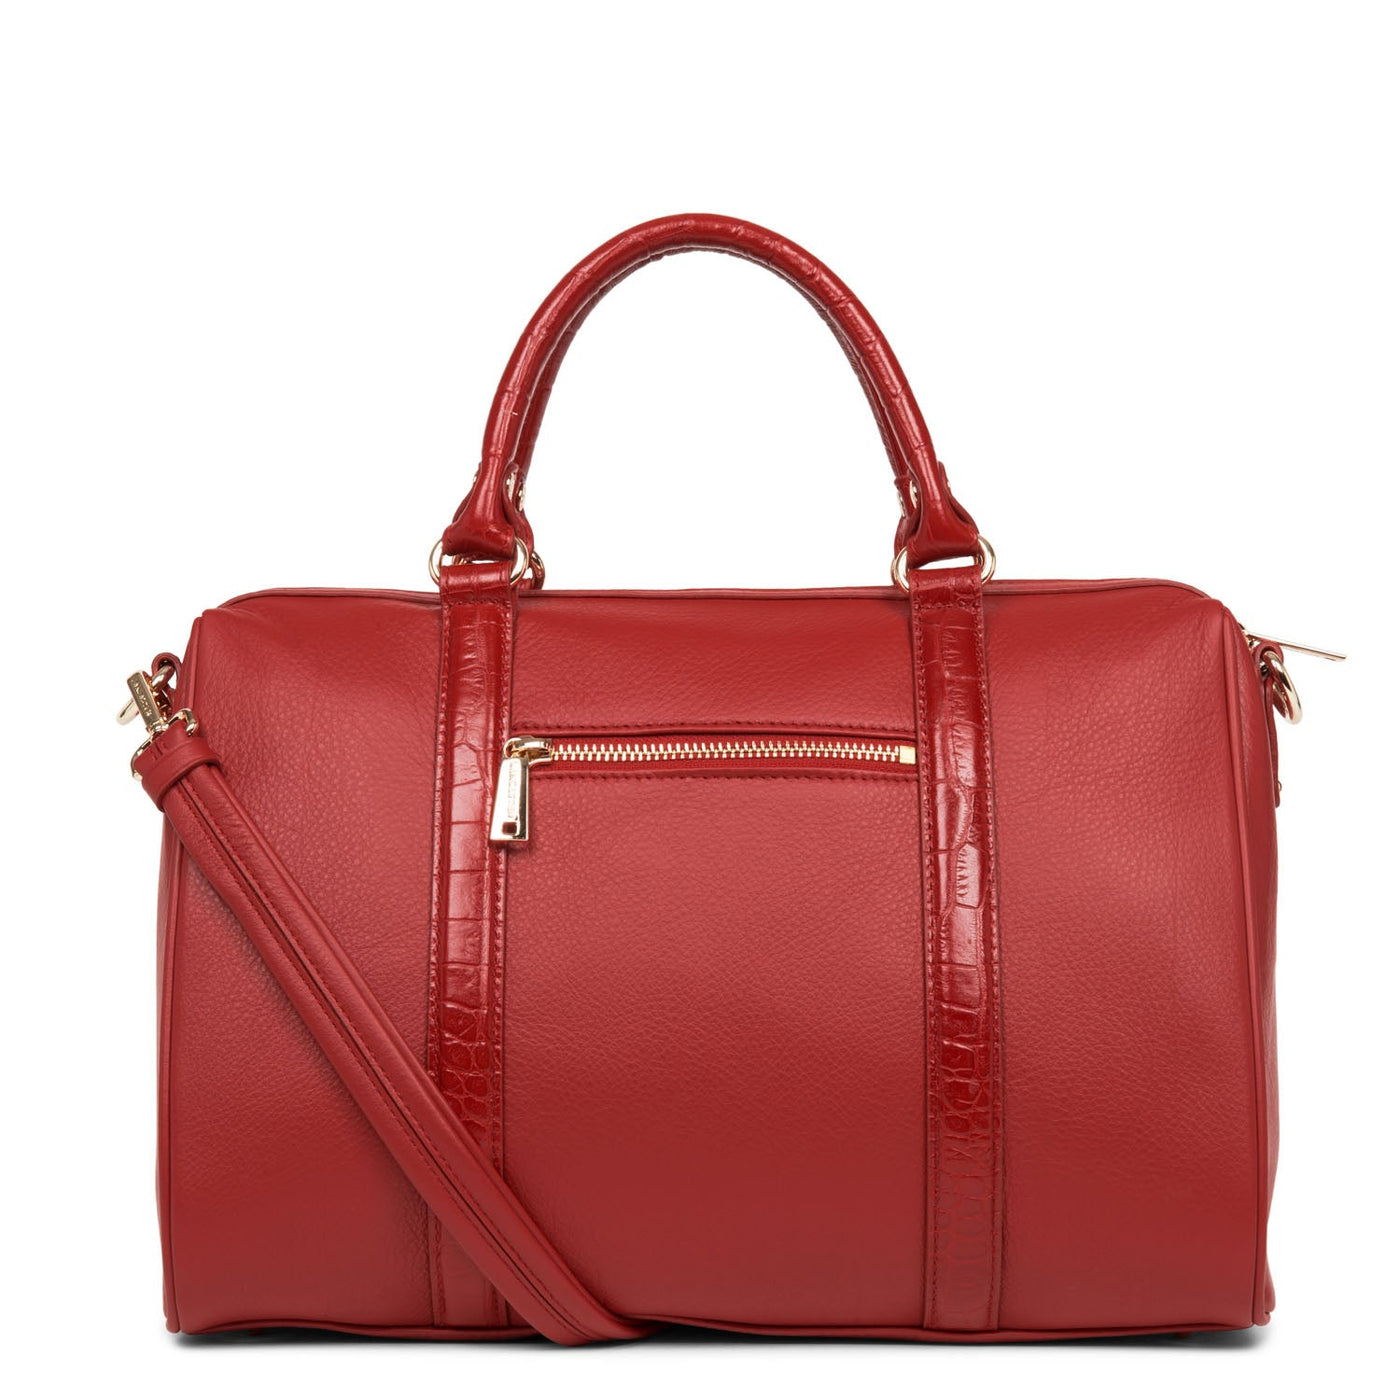 large duffle bag - mademoiselle ana #couleur_rouge-croco